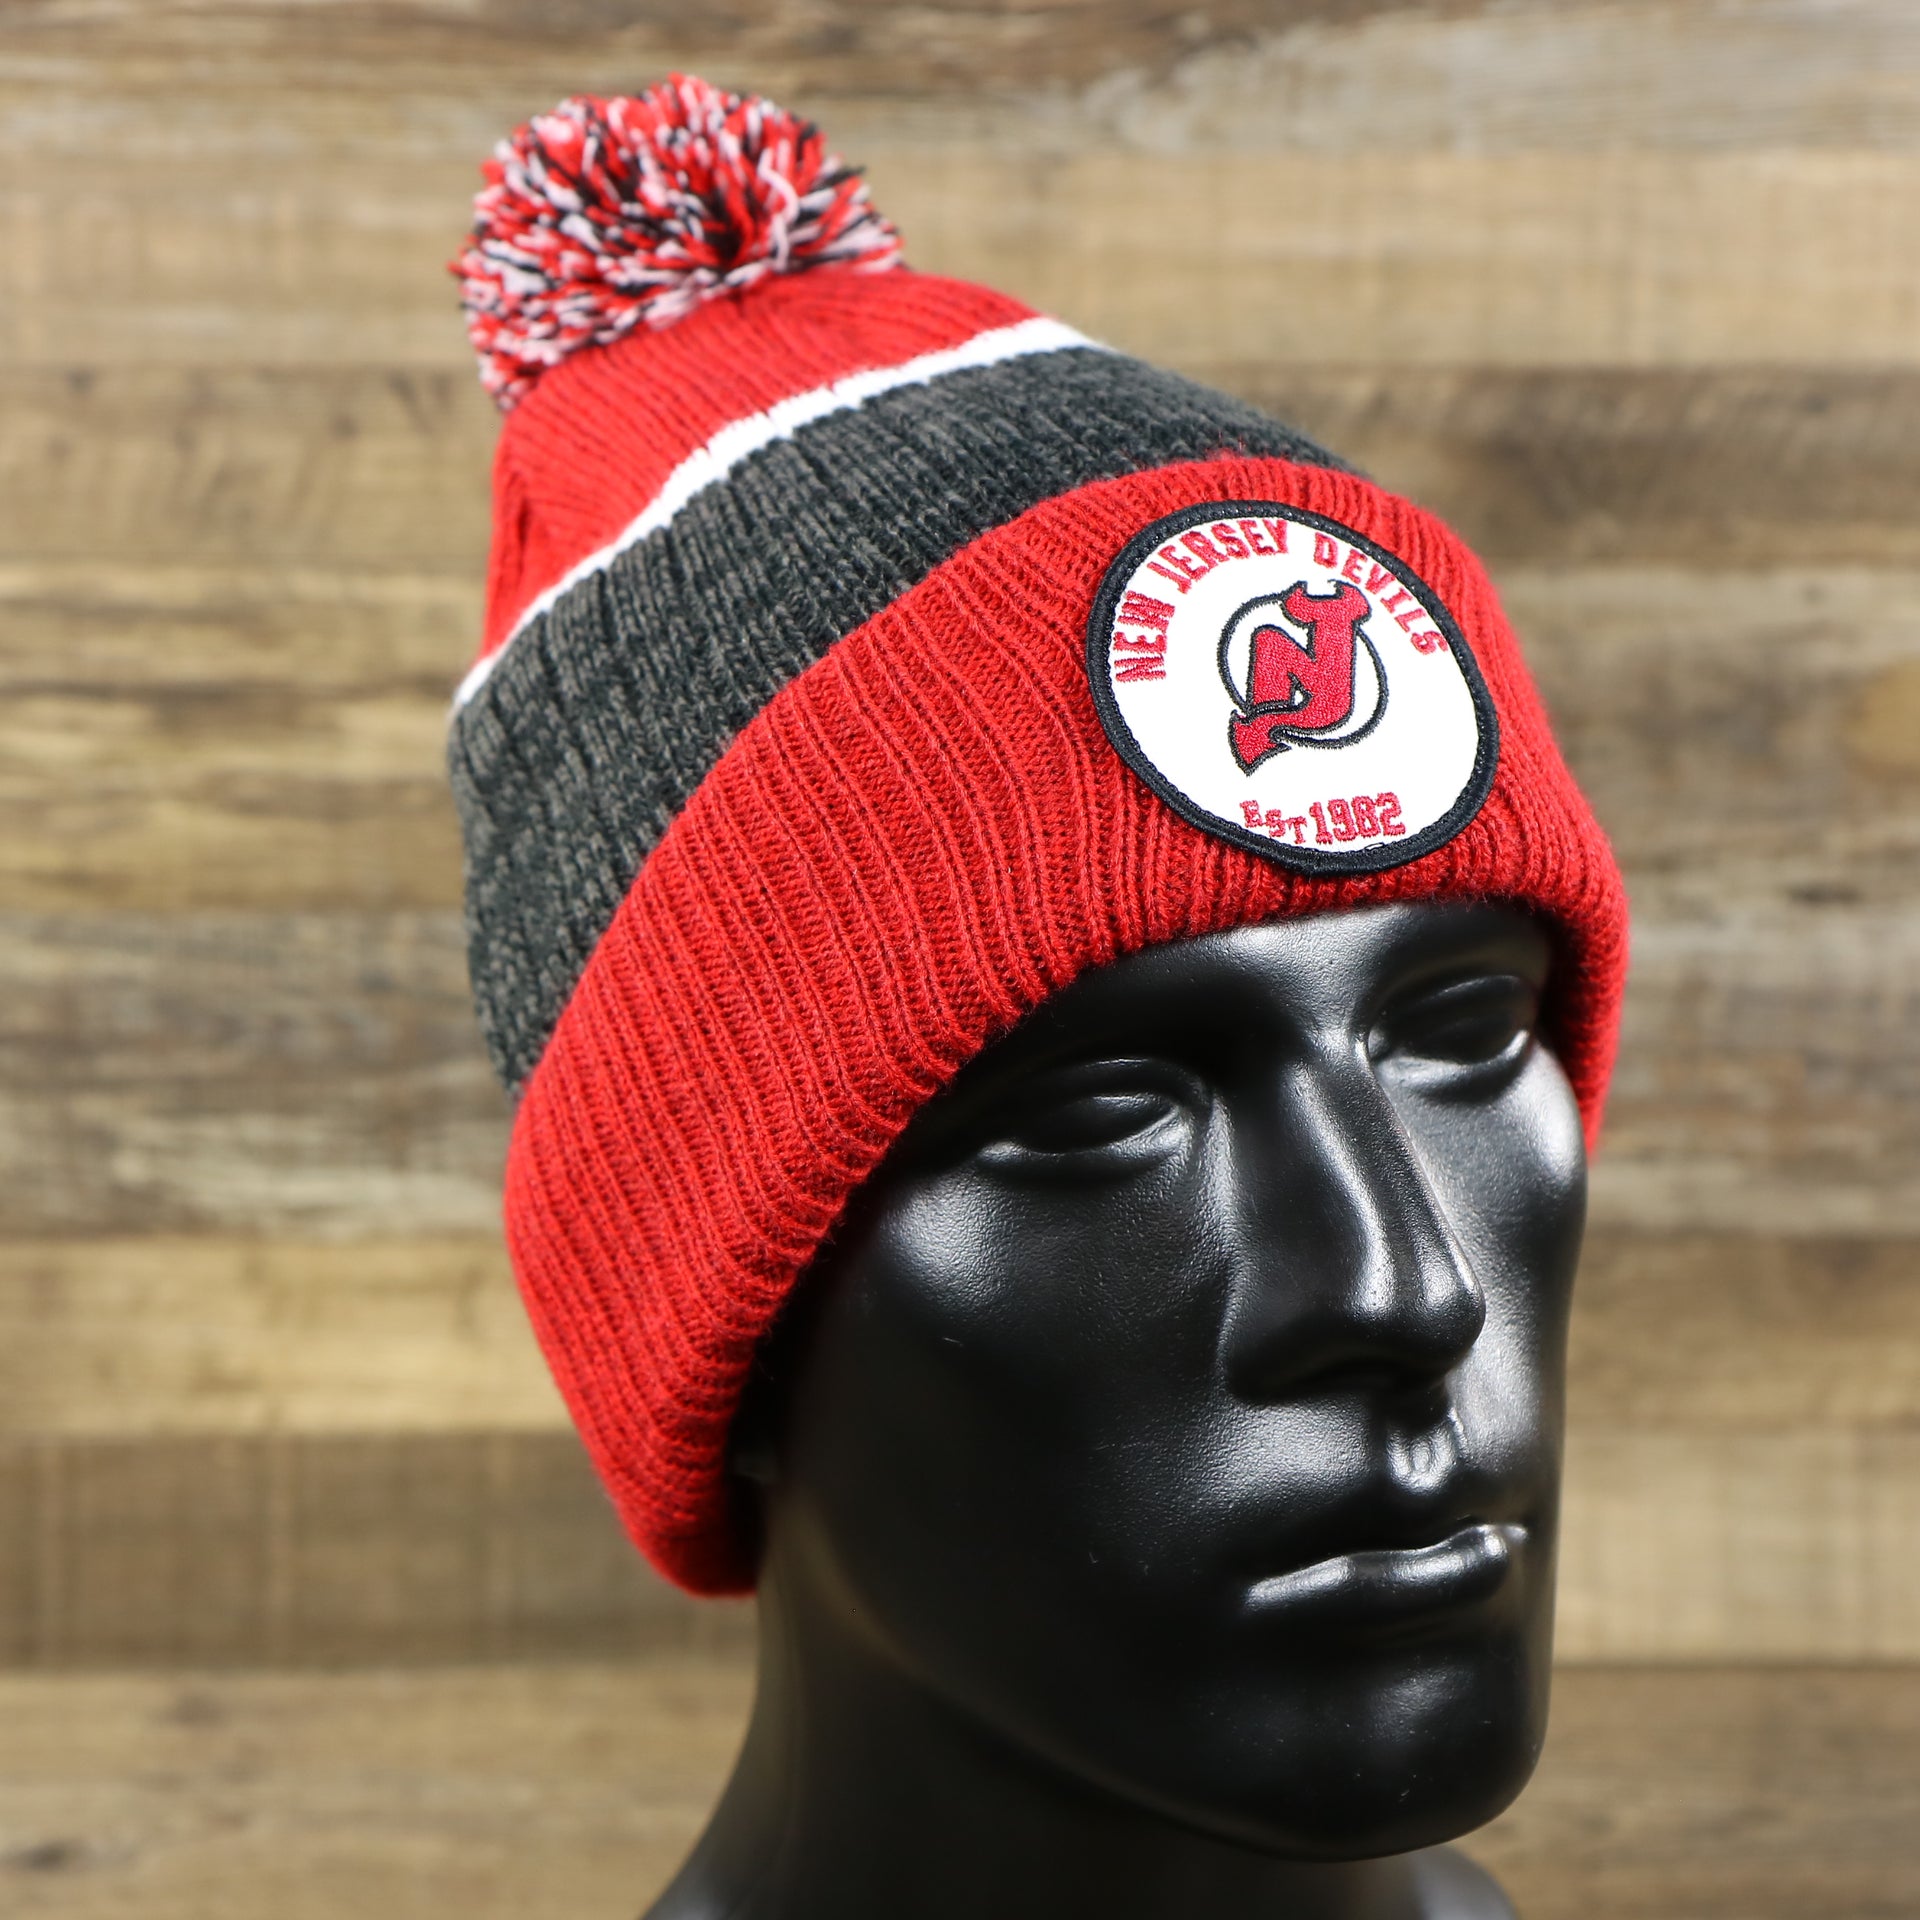 The New Jersey Devils Cuffed Logo Striped Winter Beanie With Pom Pom | Red and Gray Winter Beanie